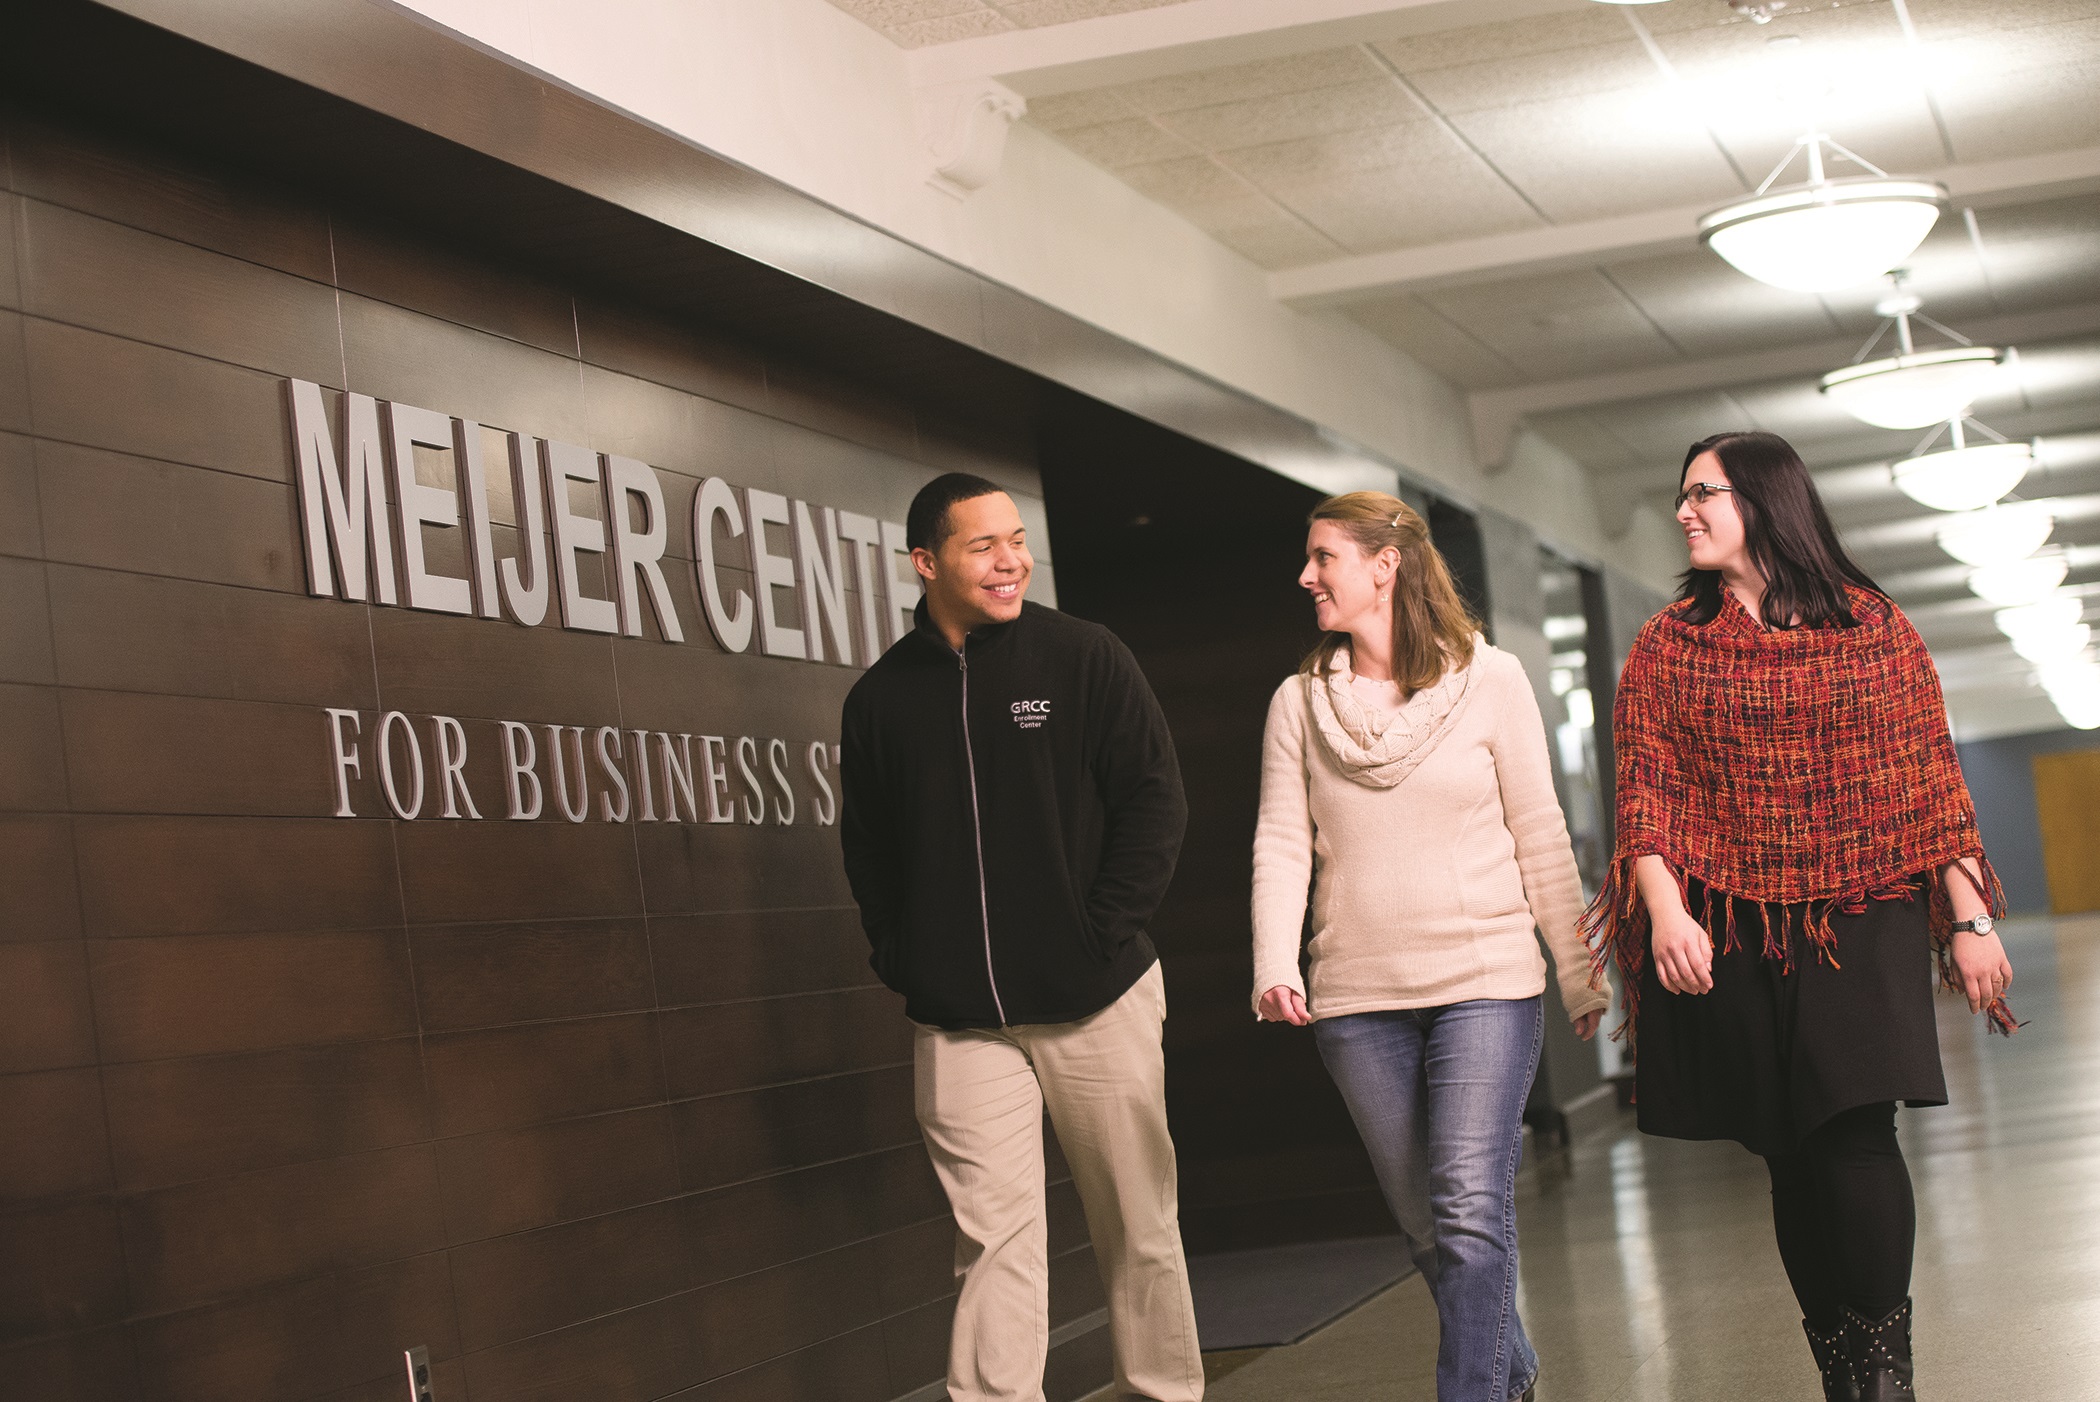 GRCC Business Students walking in the Meijer Center for Business